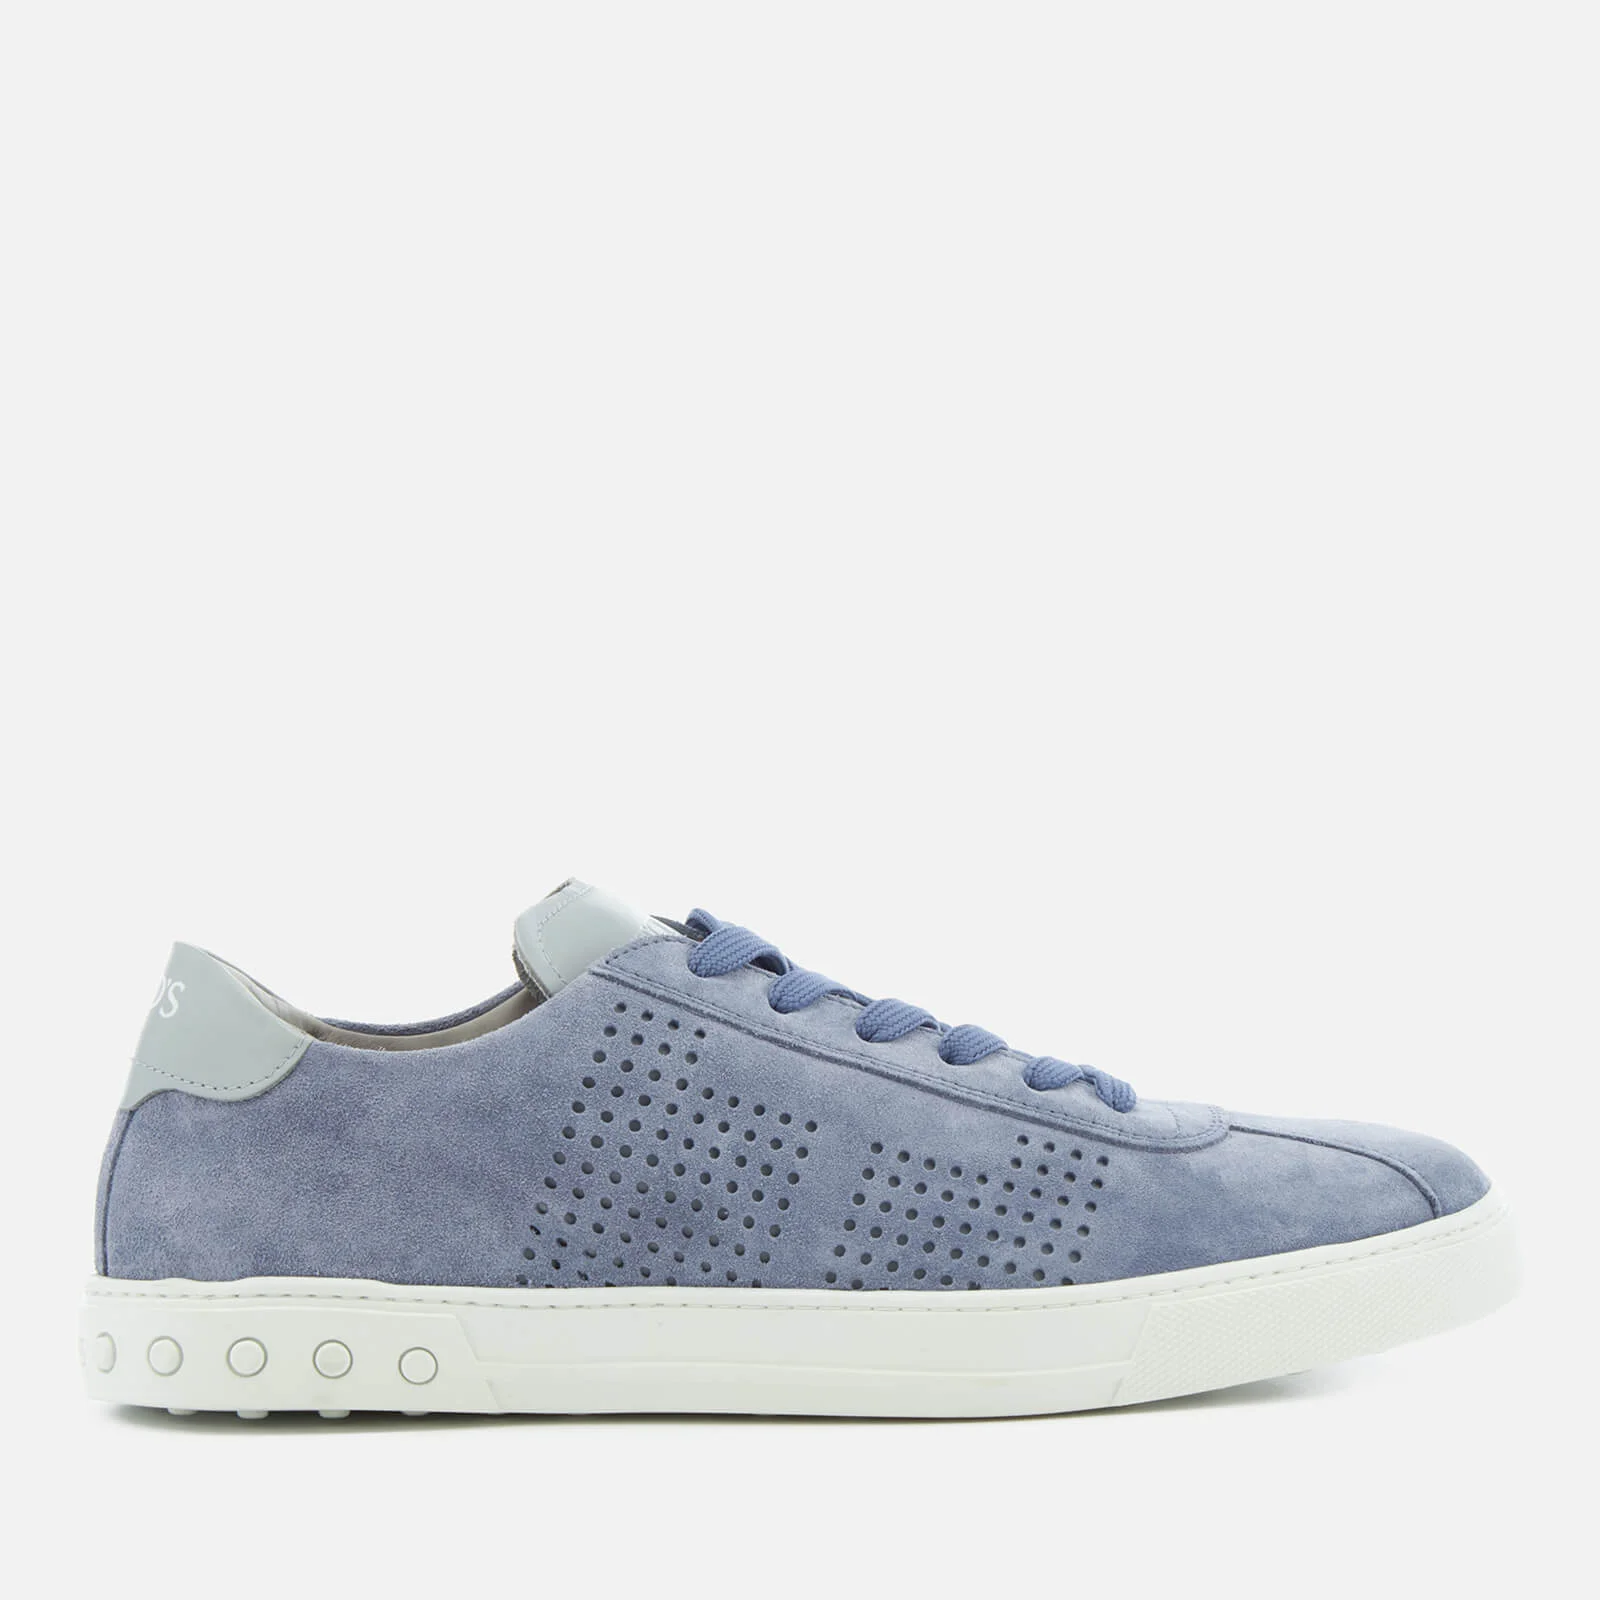 Tod's Men's Suede Perforated Side Trainers - Light Blue Image 1